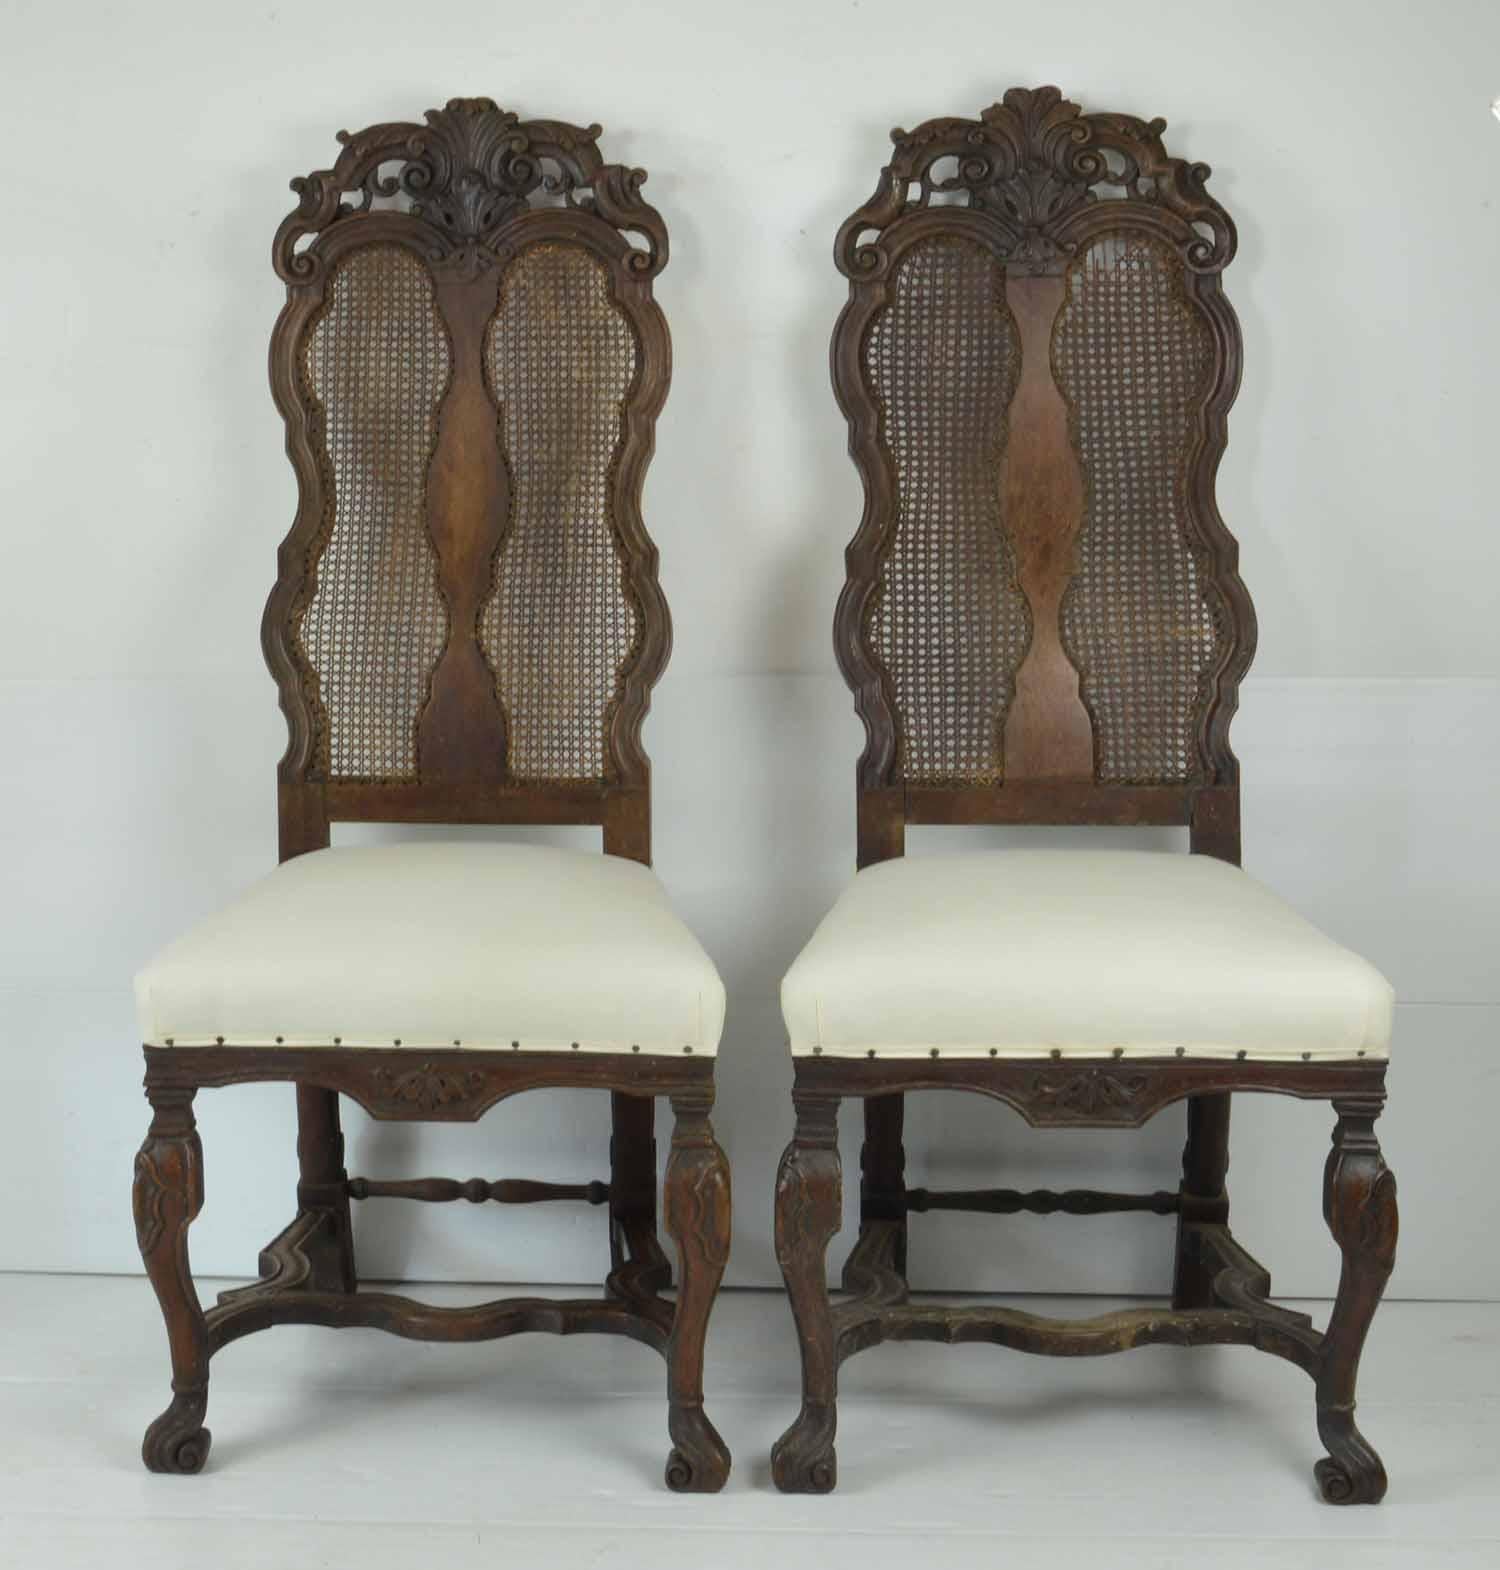  4 Antique Baroque Style Dutch Carved Walnut and Bergère Chairs In Good Condition For Sale In St Annes, Lancashire